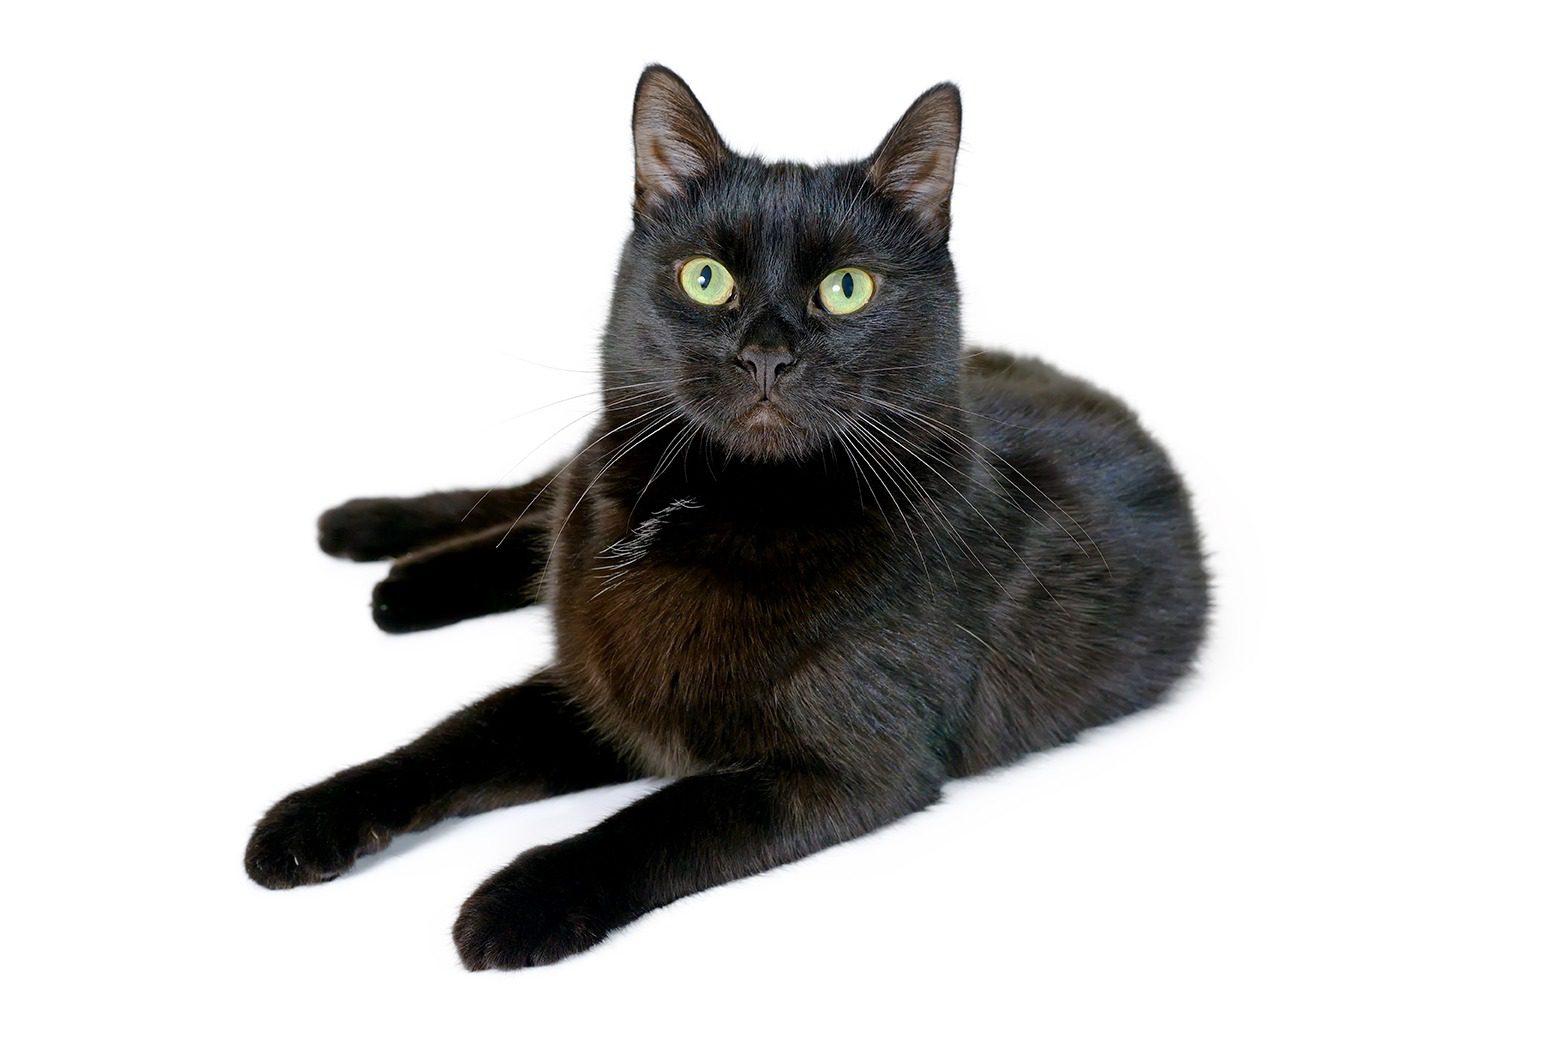 Black Magic: Pawsitively Cool Facts About Black Cats